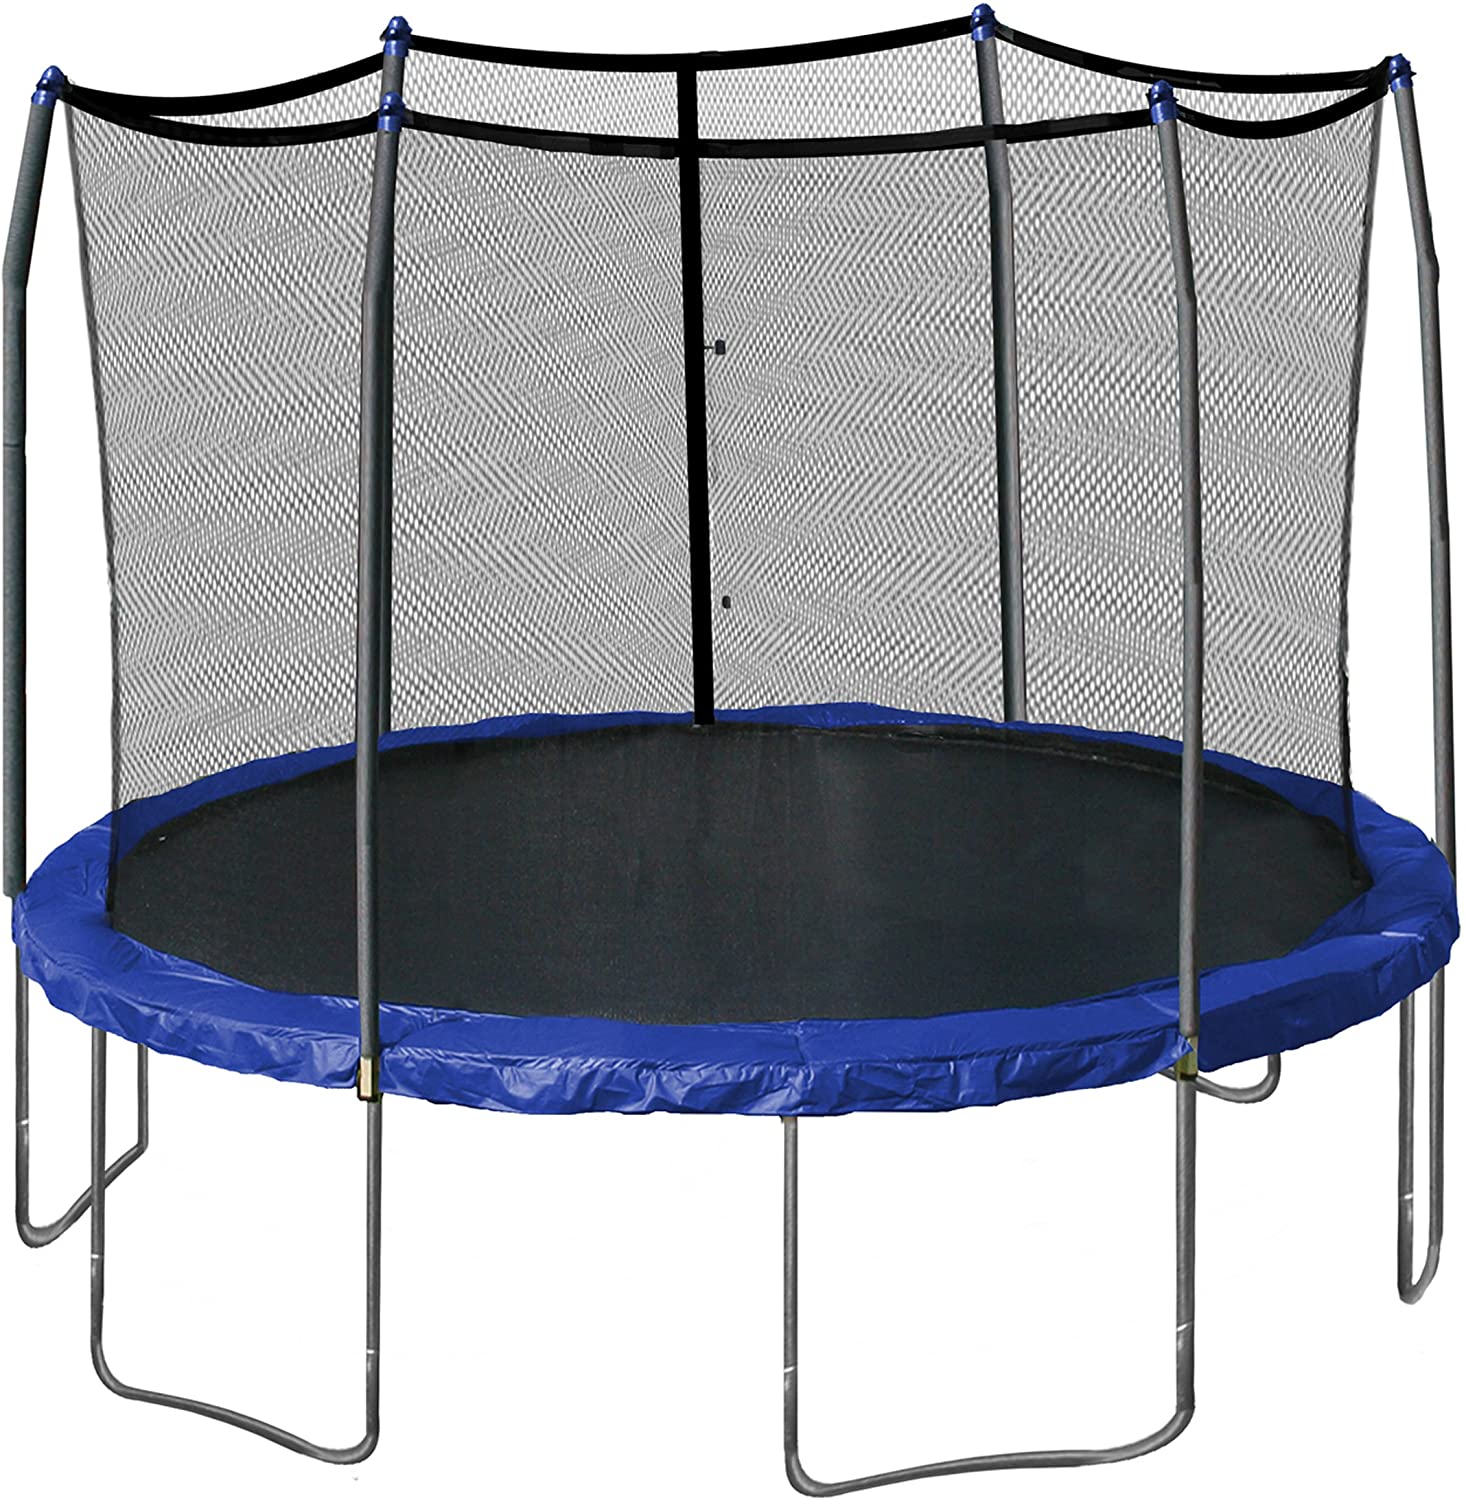 Skywalker 12-Feet Round Trampoline and Enclosure with Spring Pad